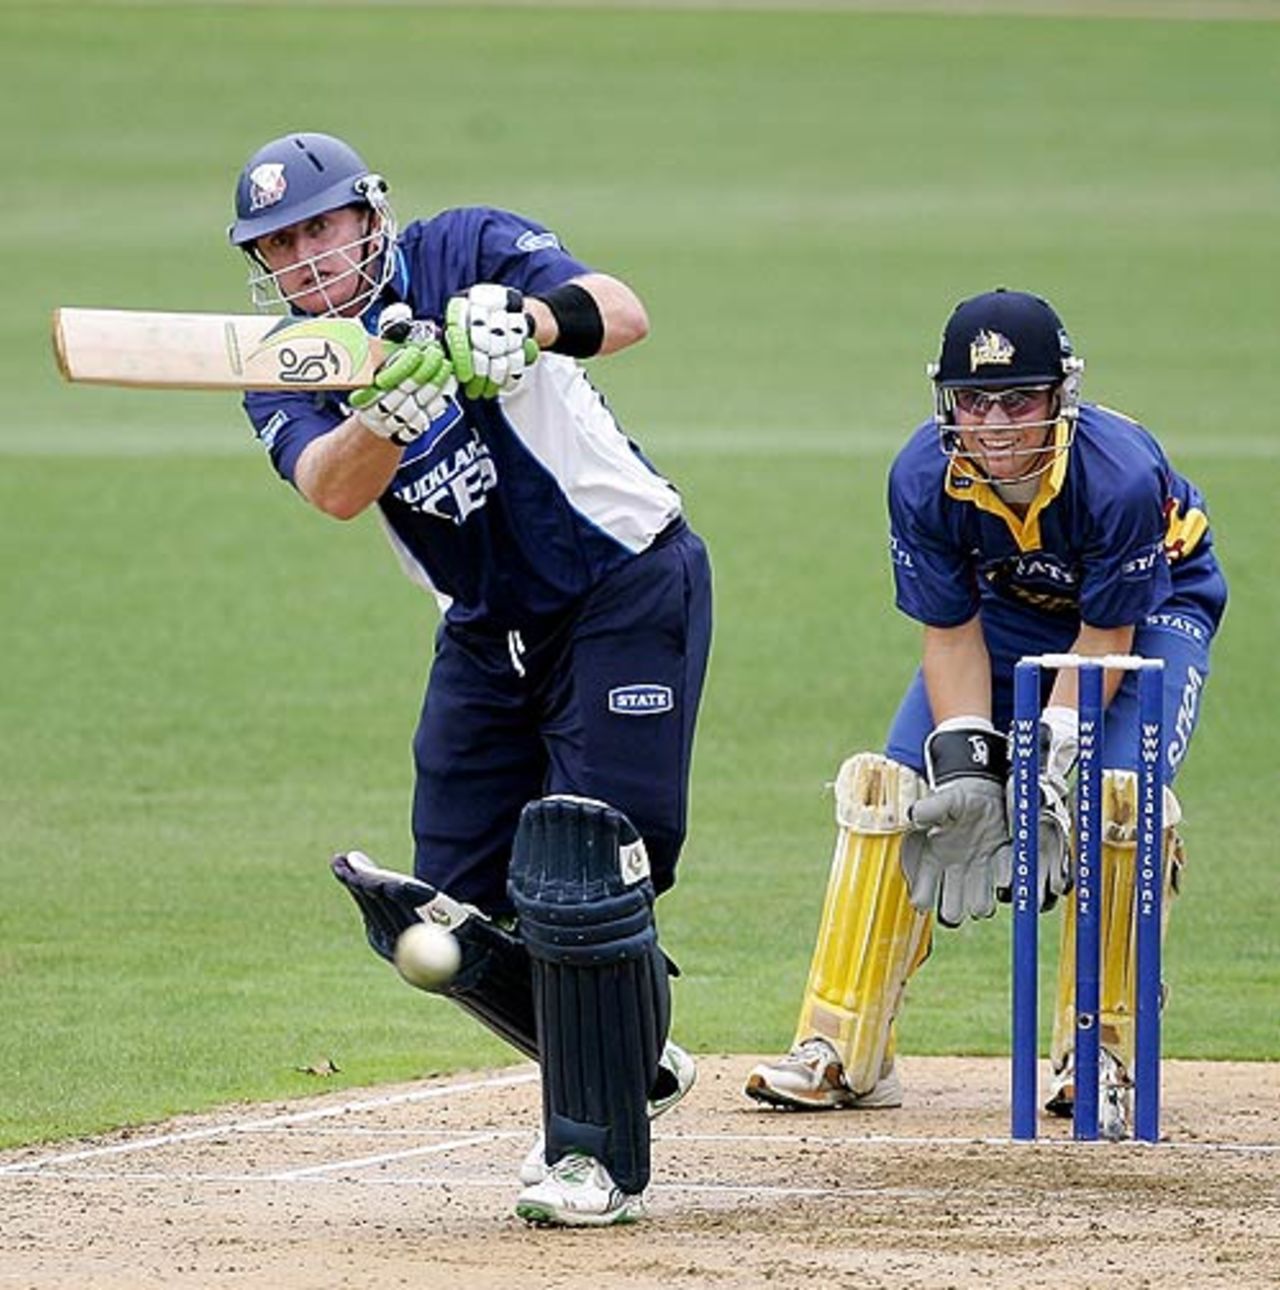 Scott Styris drives on his way to 68, Auckland v Otago, State Shield final, Auckland, March 2, 2008